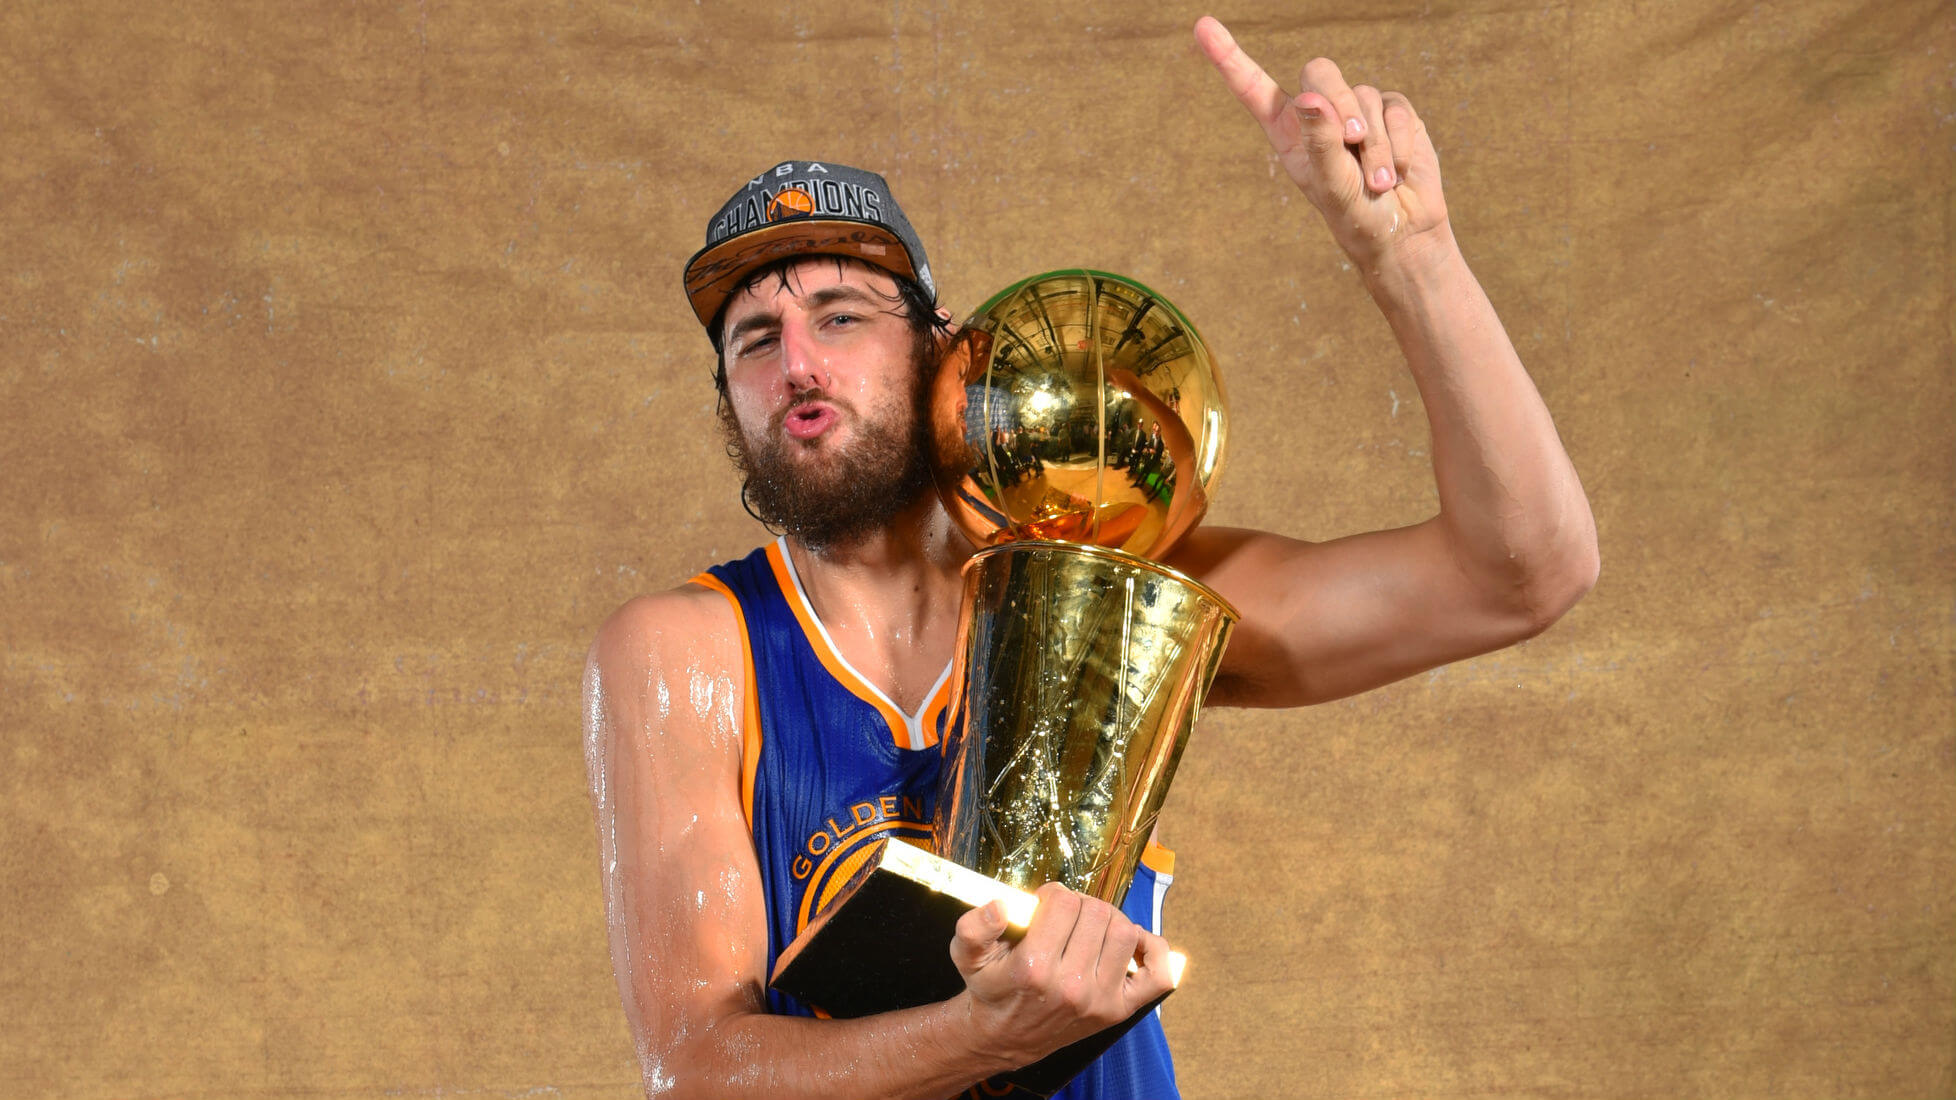 facts about golden state warriors - andrew bogut (1)